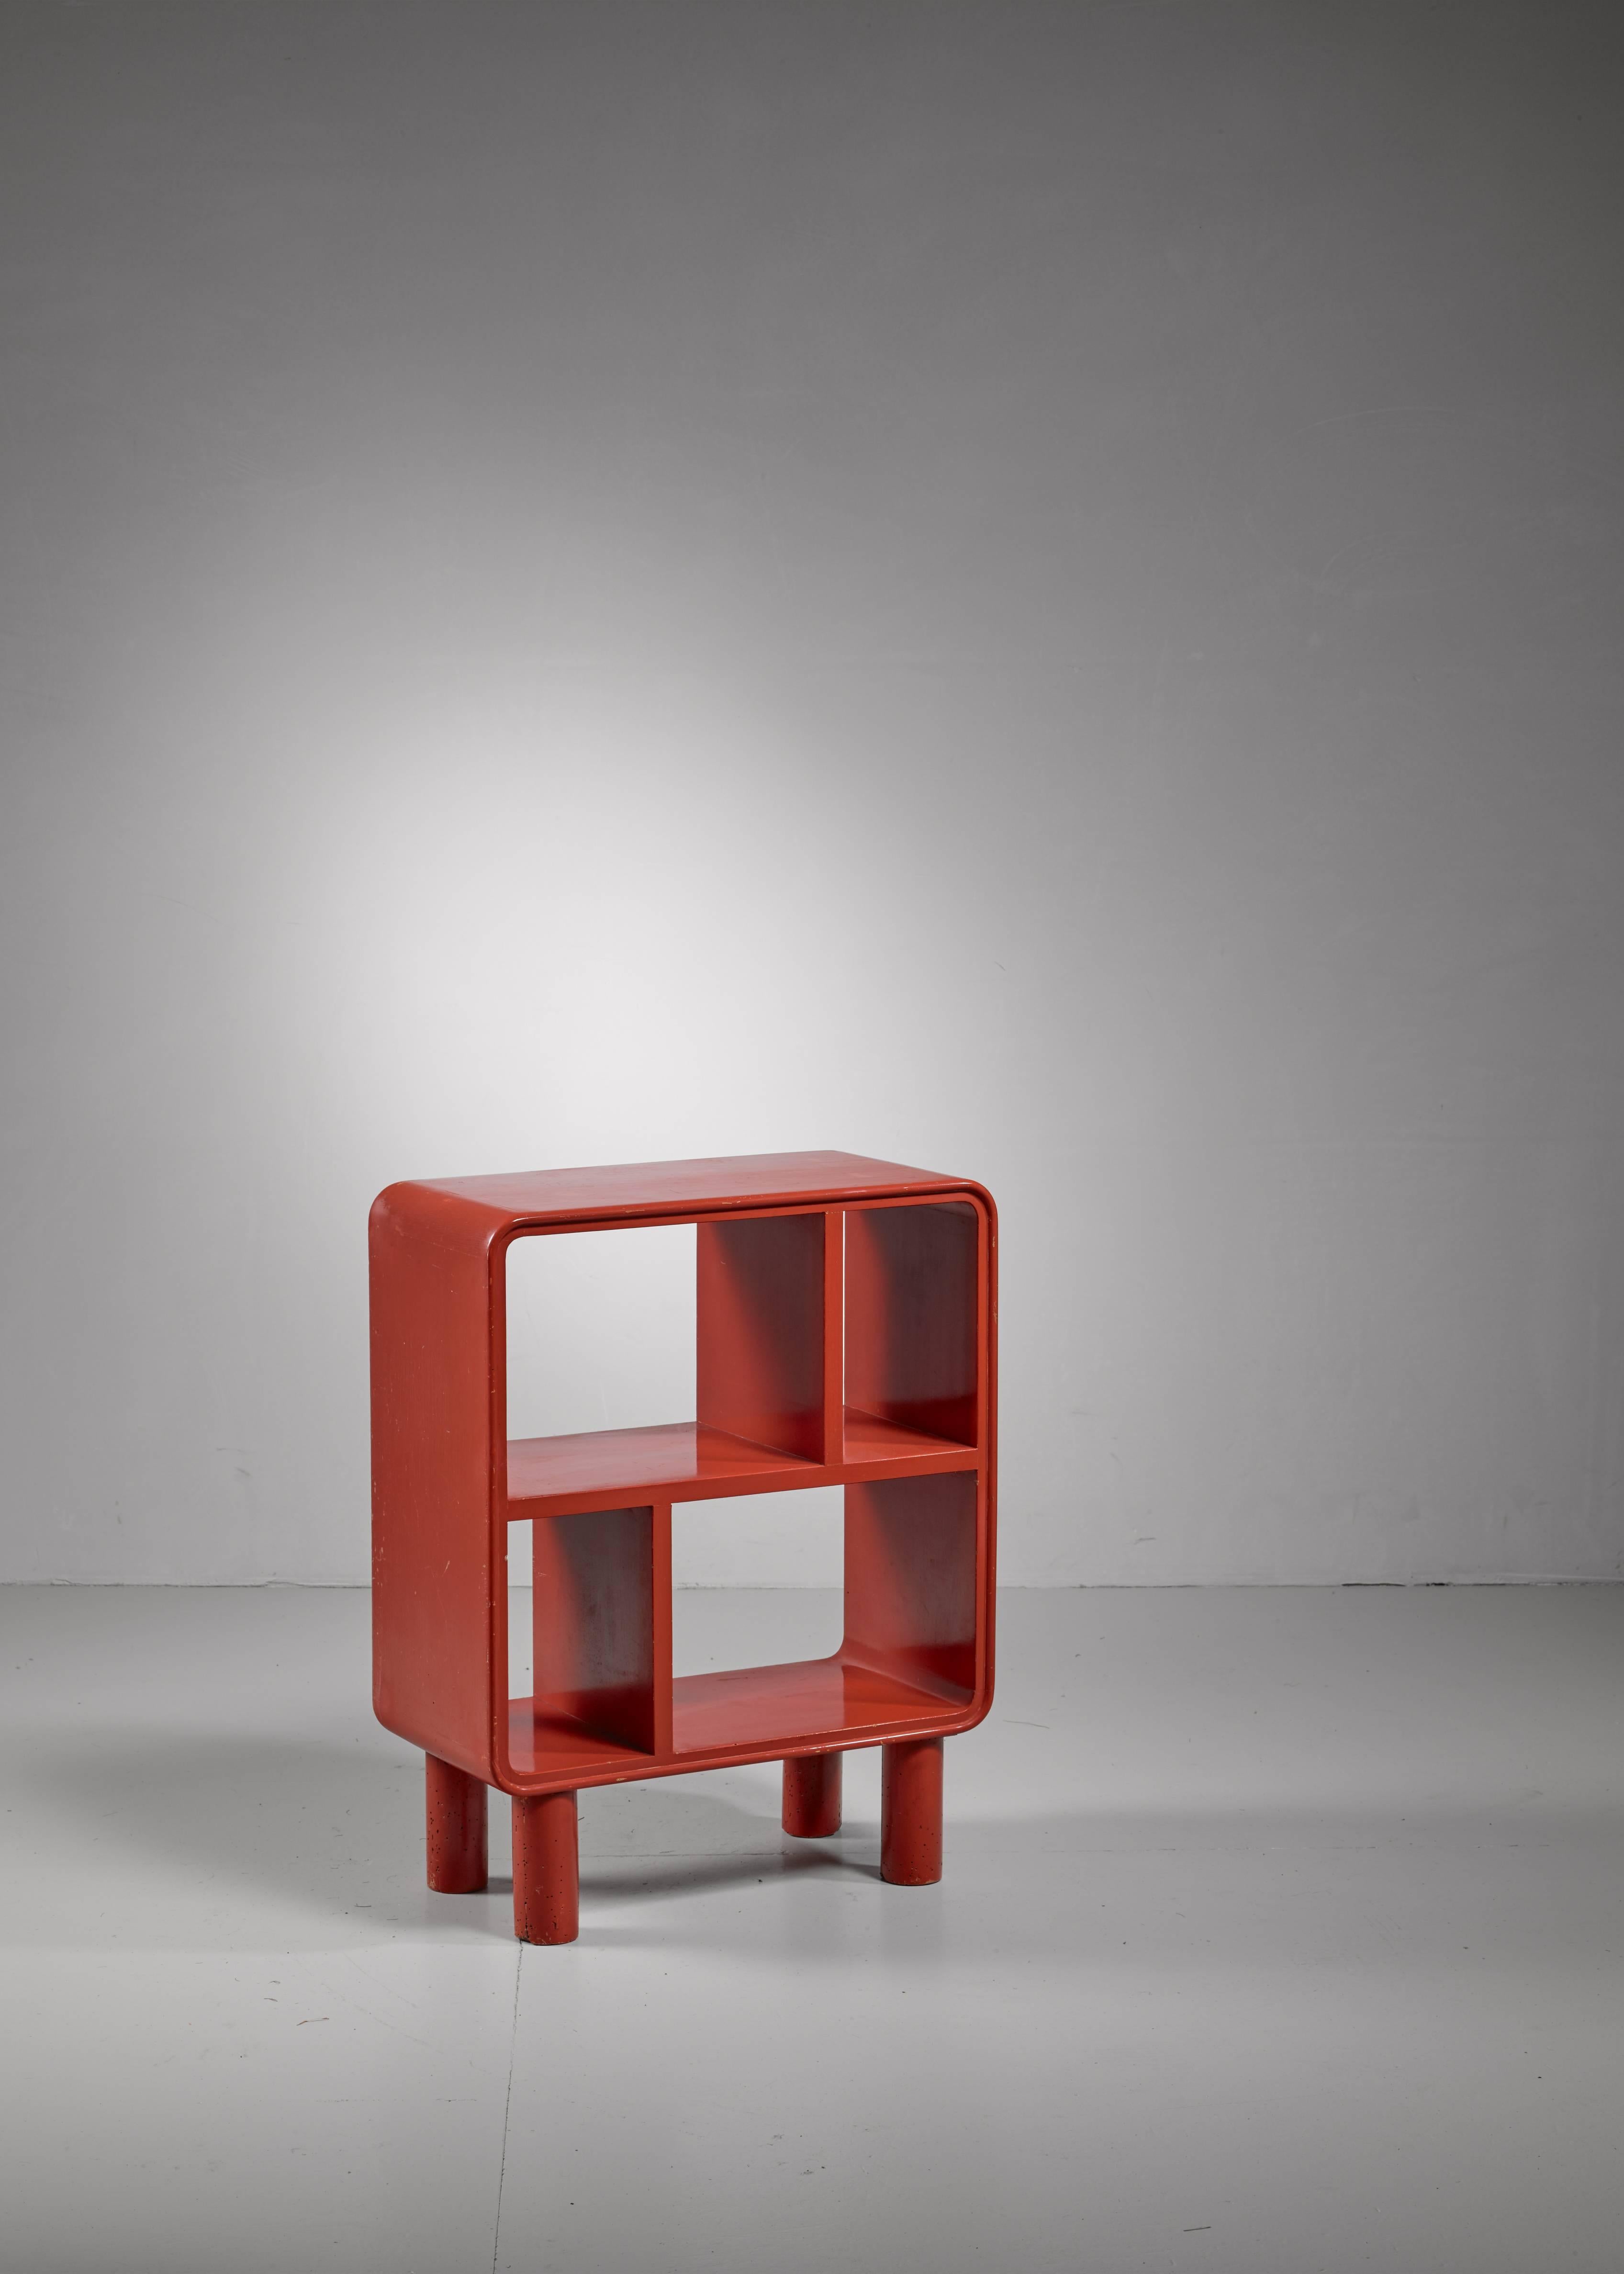 A small wooden shelving unit with four compartments, painted red. The square unit with rounded corners stands on four cylindrical feet.  